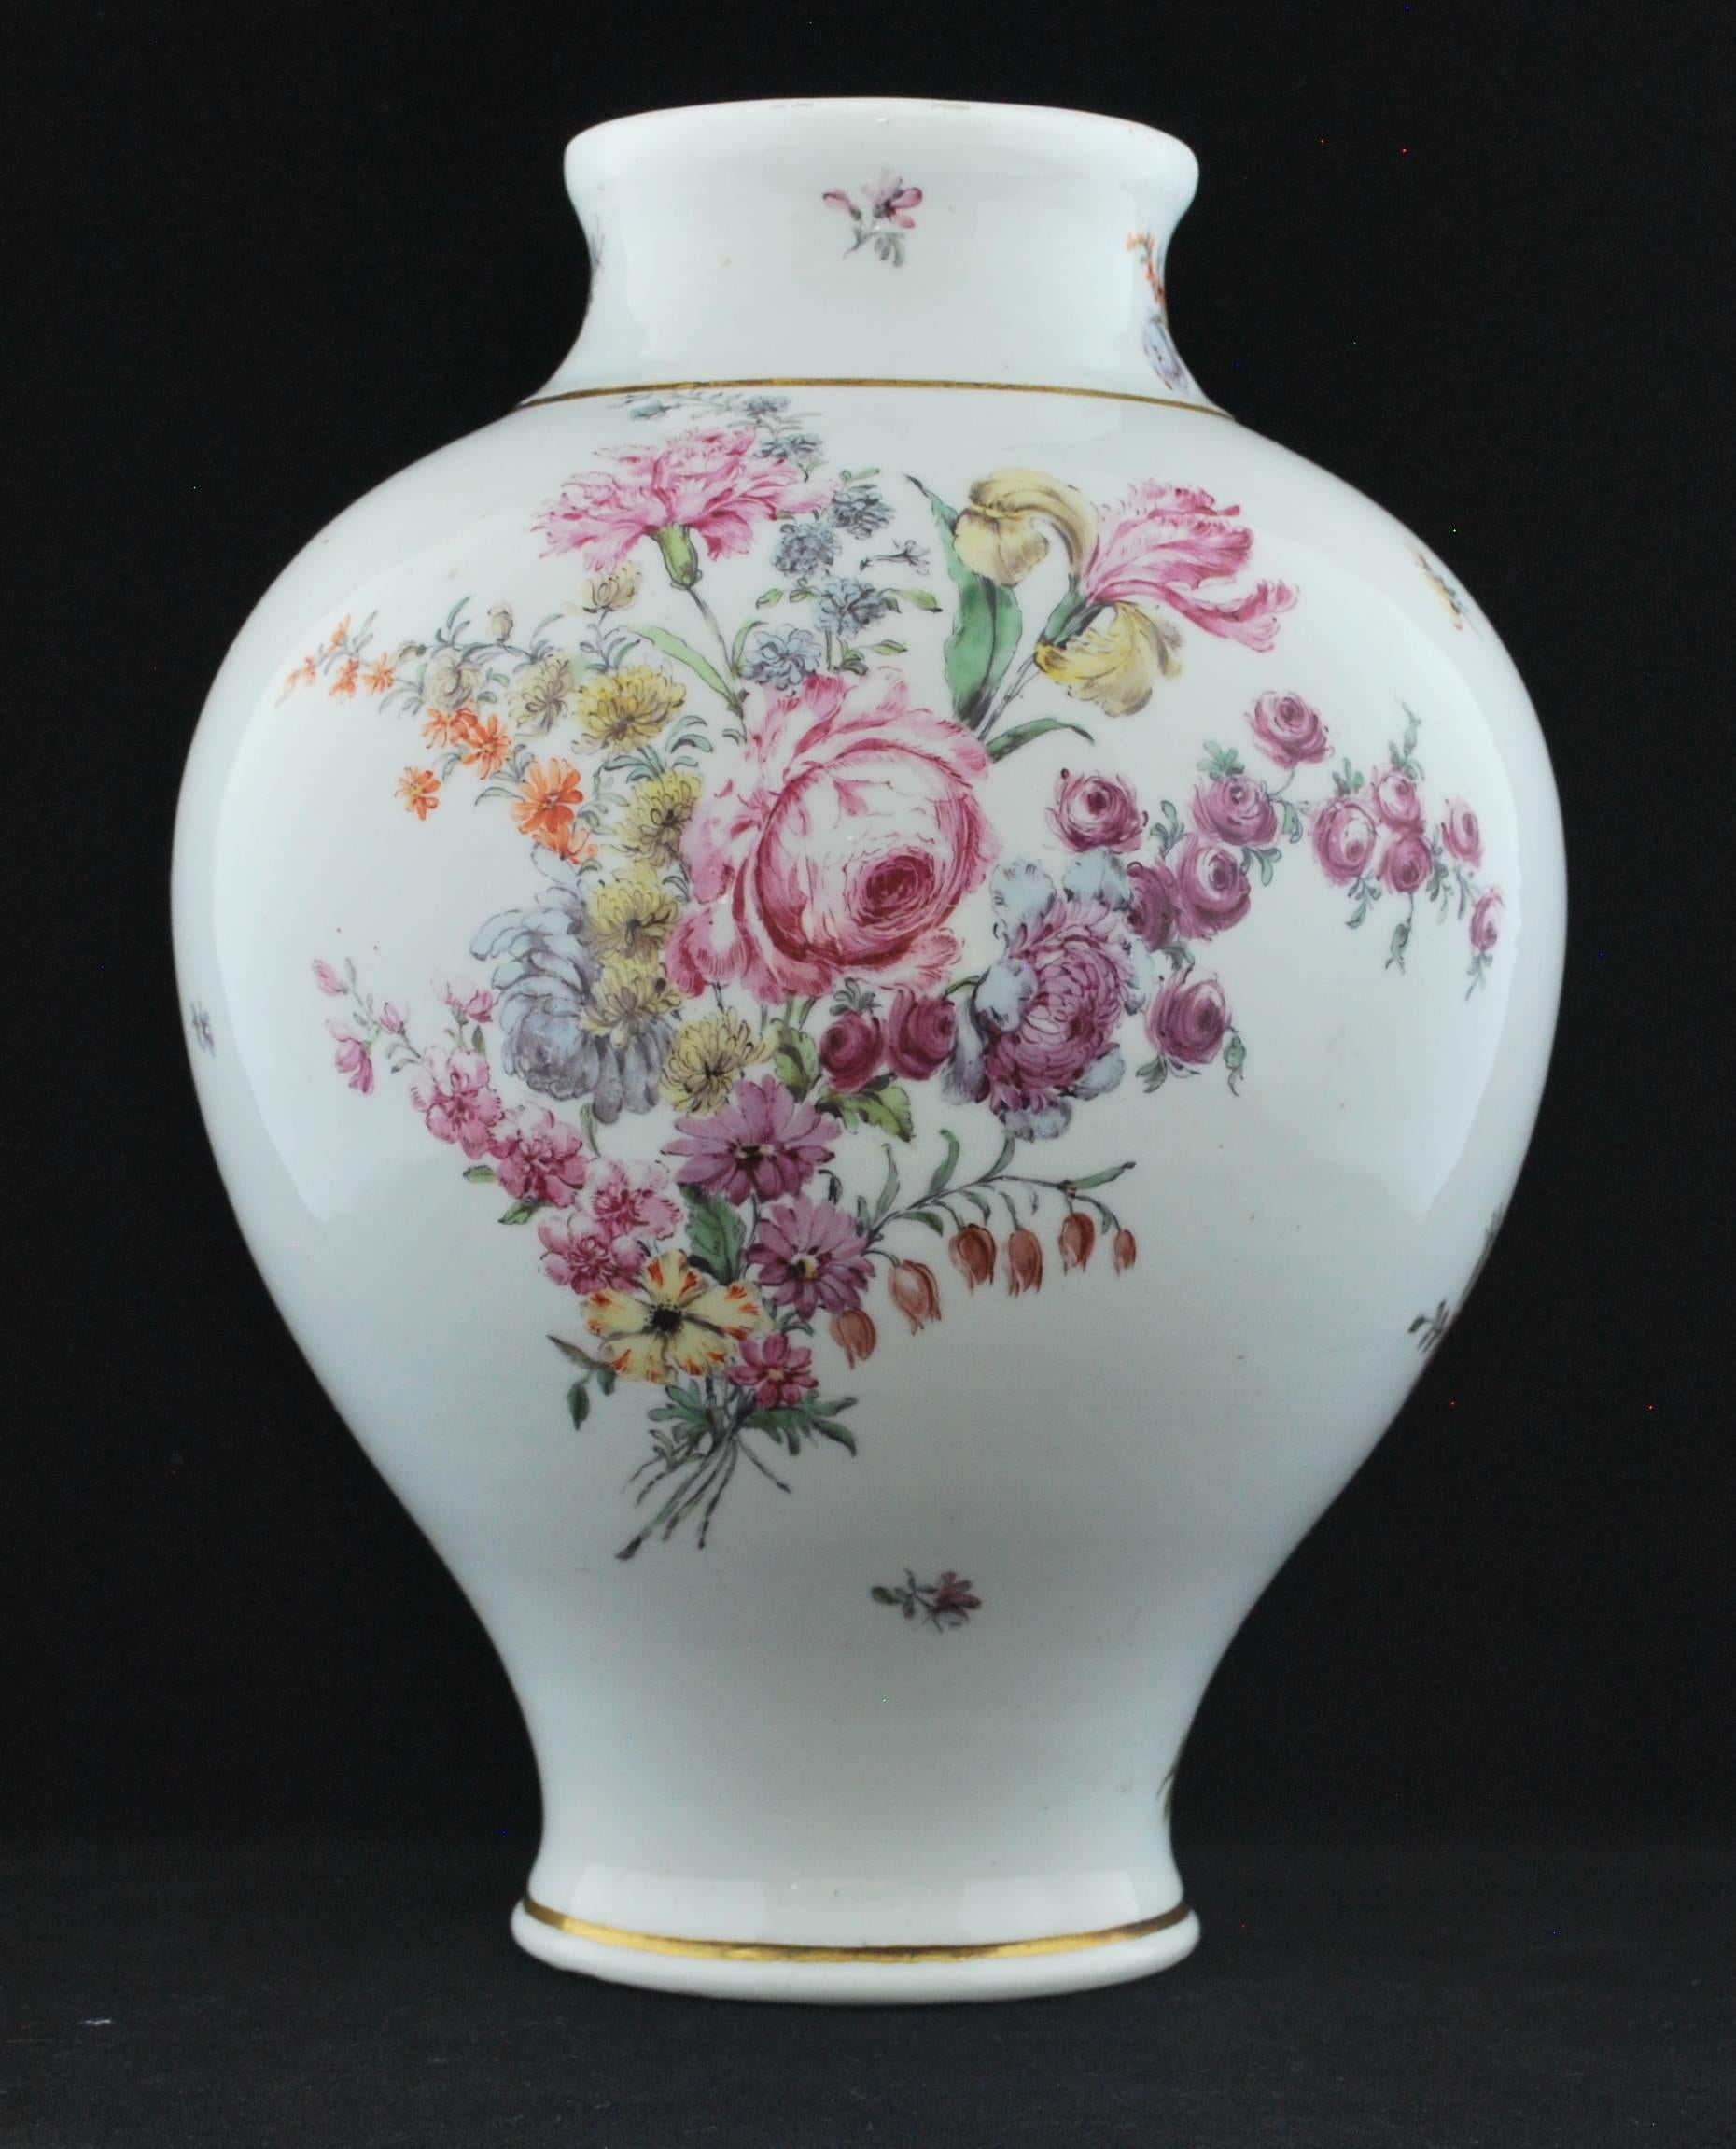 Baluster shaped vase in soft paste porcelain with early gilt line decoration. Superb flower painting.

The shapes are very close, and the gilding is slightly more elaborate on the second vase, which probably about a year later than the first, when